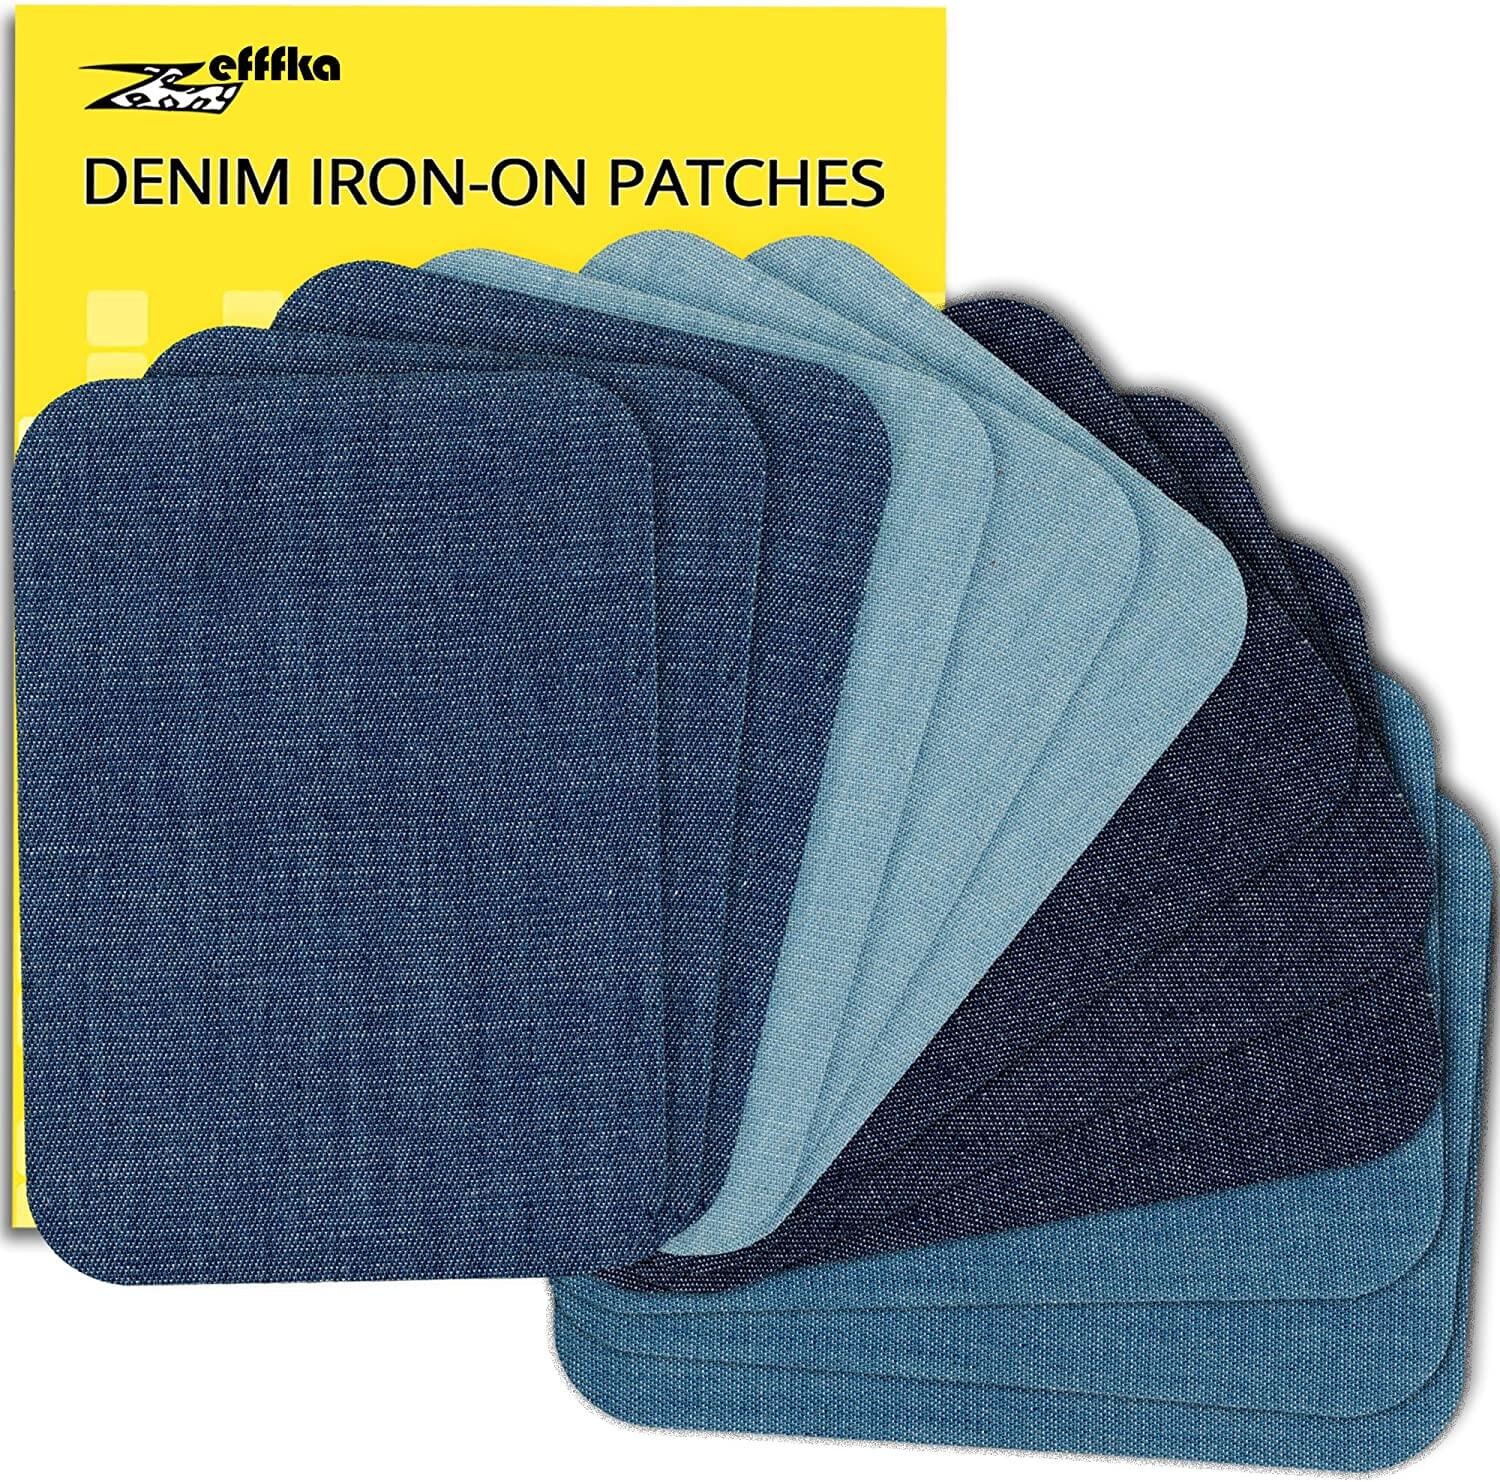   Iron on Patches: Premium Quality Denim Iron on Jean Patches No-Sew Shades of Blue 